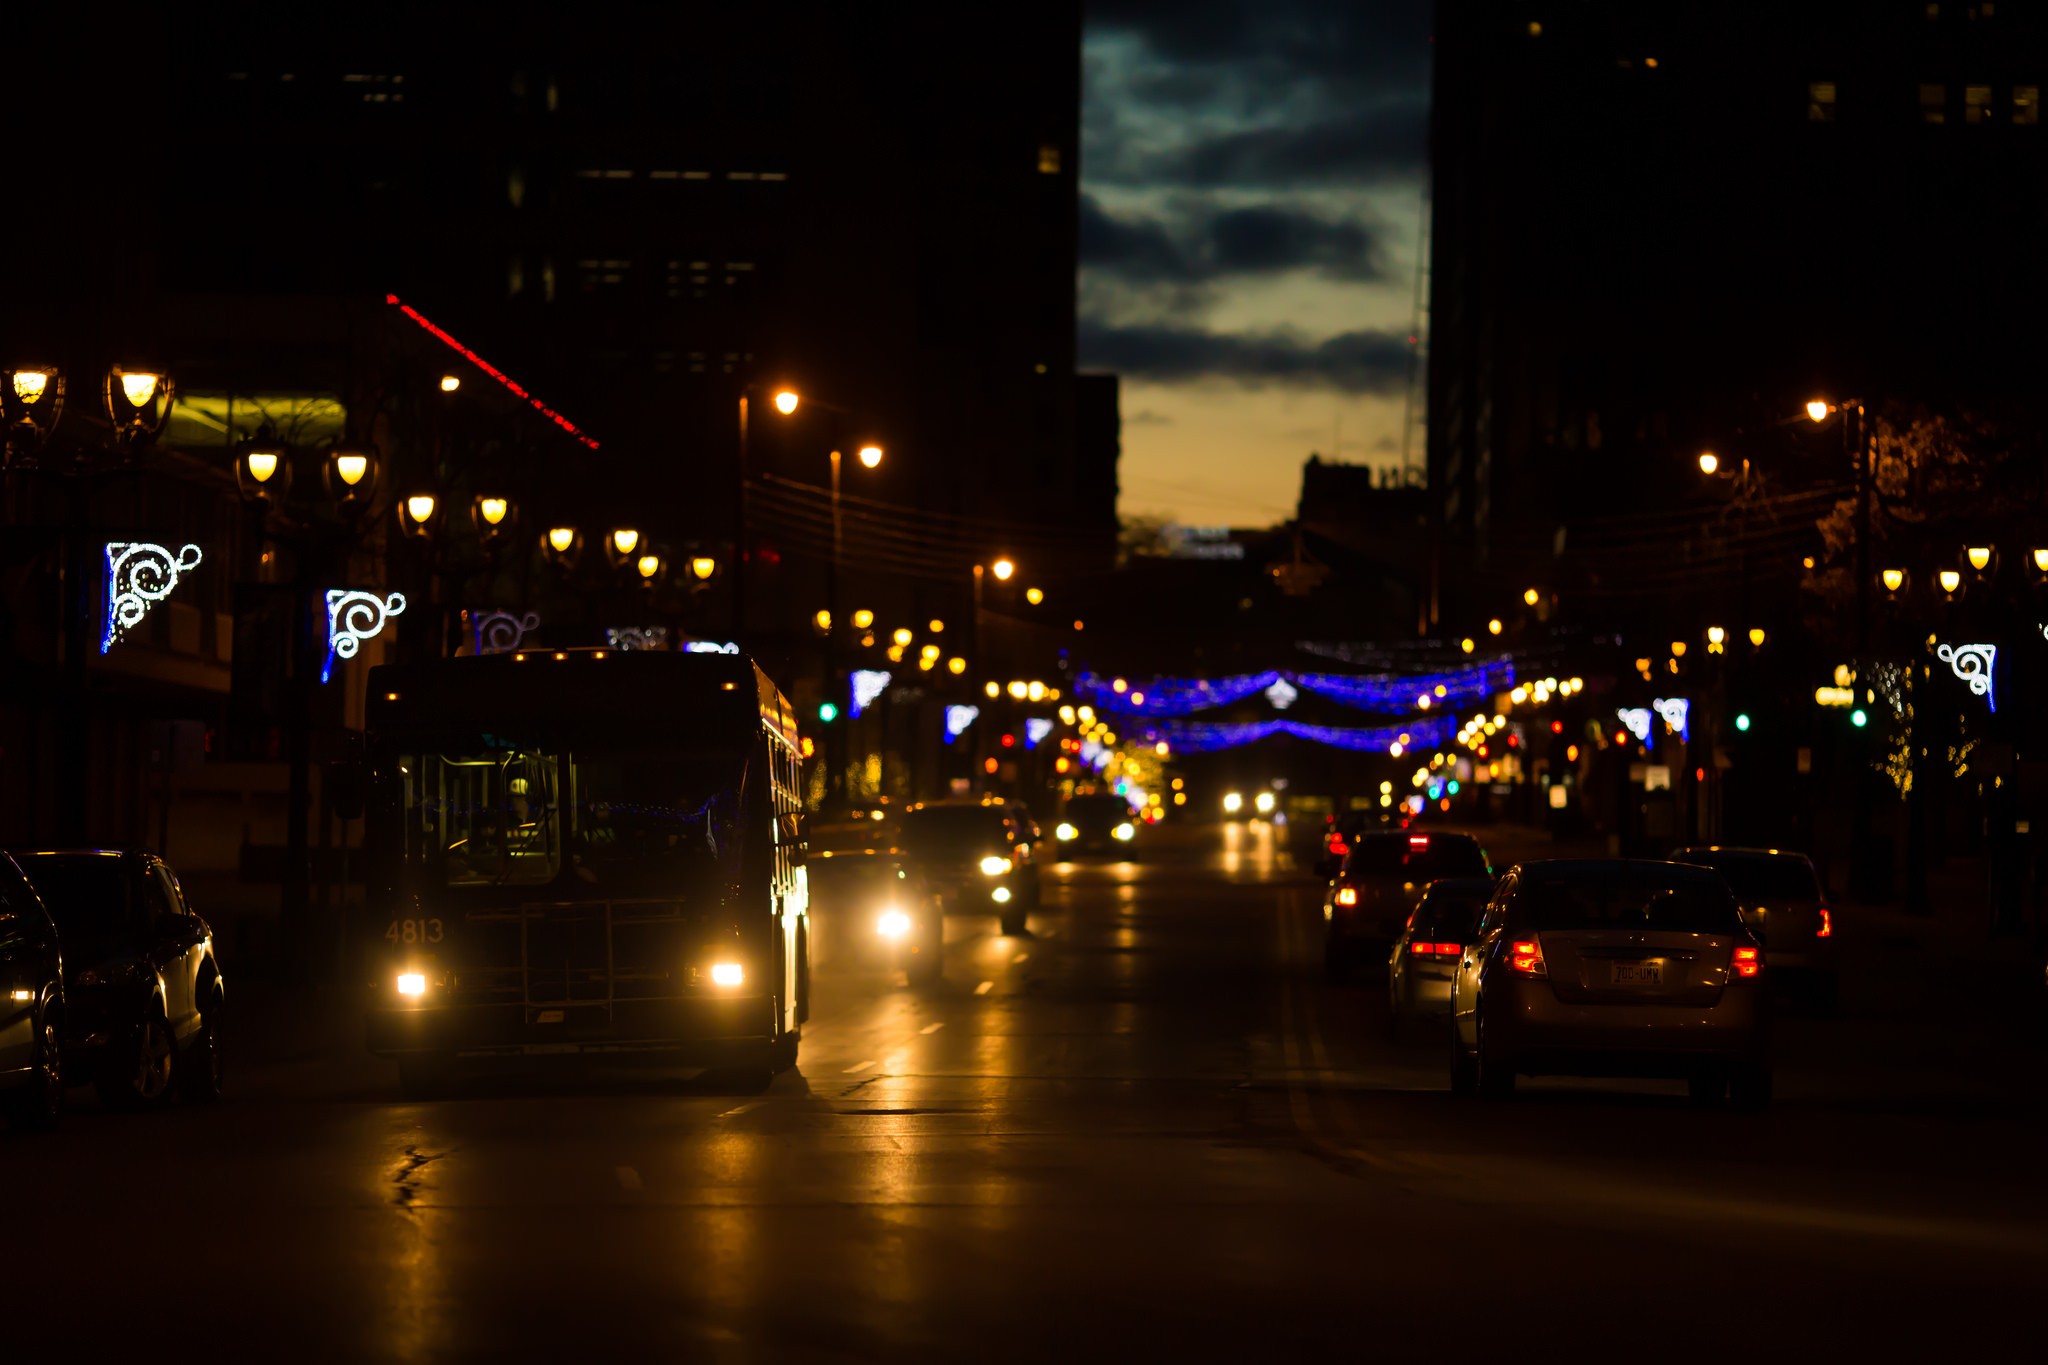 photography, Buses, Bokeh, Building, Street Light, Road, Car, Lights, Street, Night, Cityscape, Wires, Banner Wallpaper